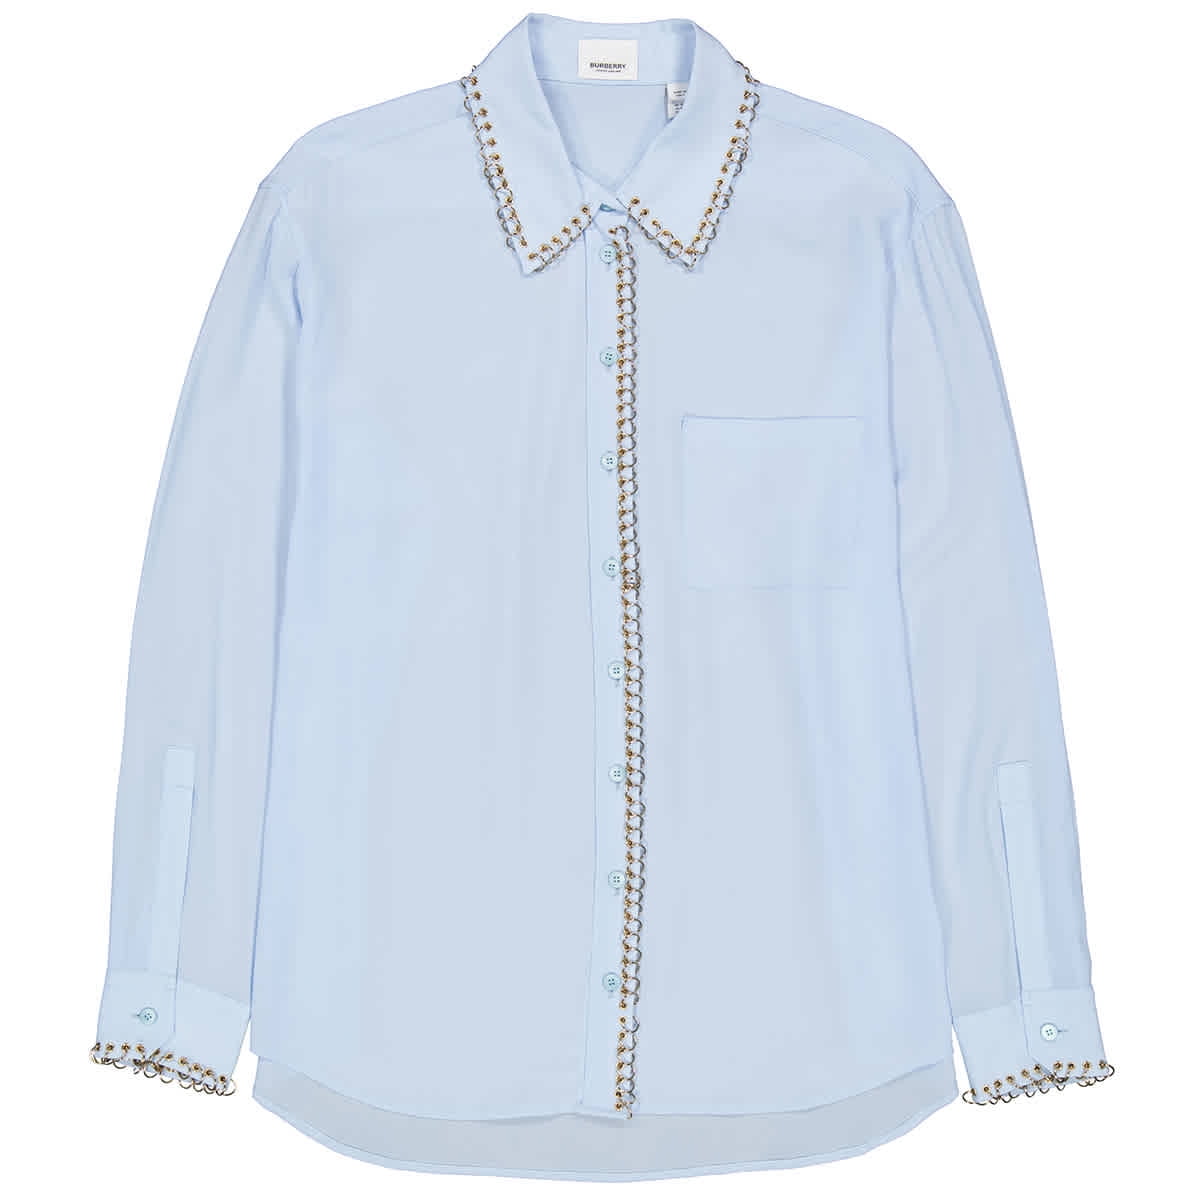 Burberry Pale Blue Silk Crepe Ring-pierced Shirt, Brand Size 8 (US Size 6)  